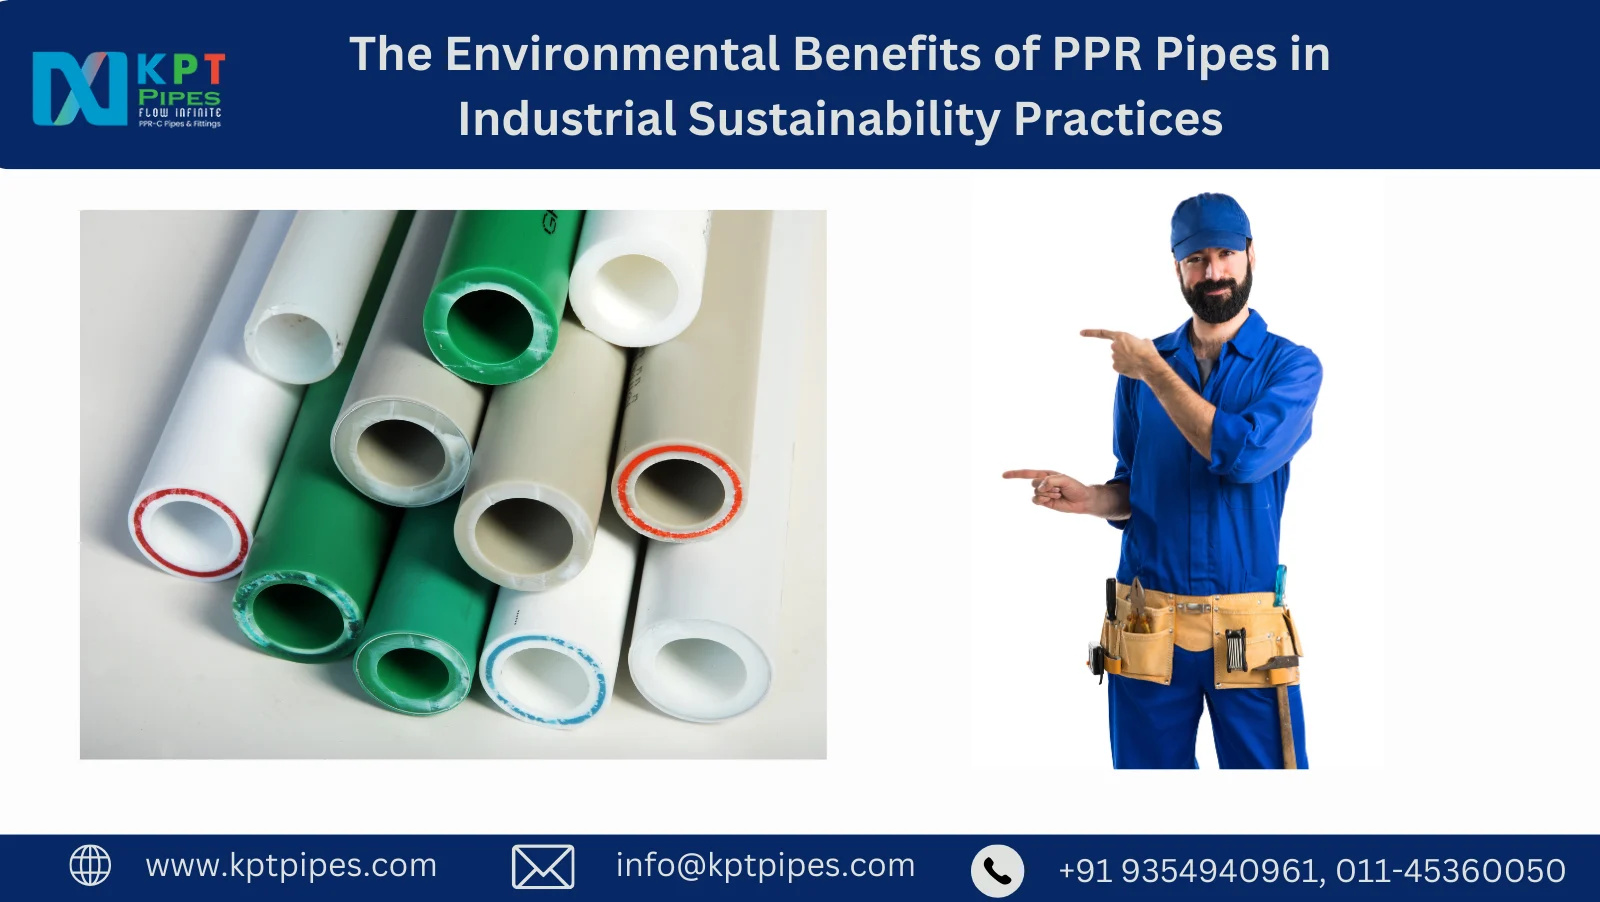 The Environmental Benefits of PPR Pipes in Industrial Sustainability Practices